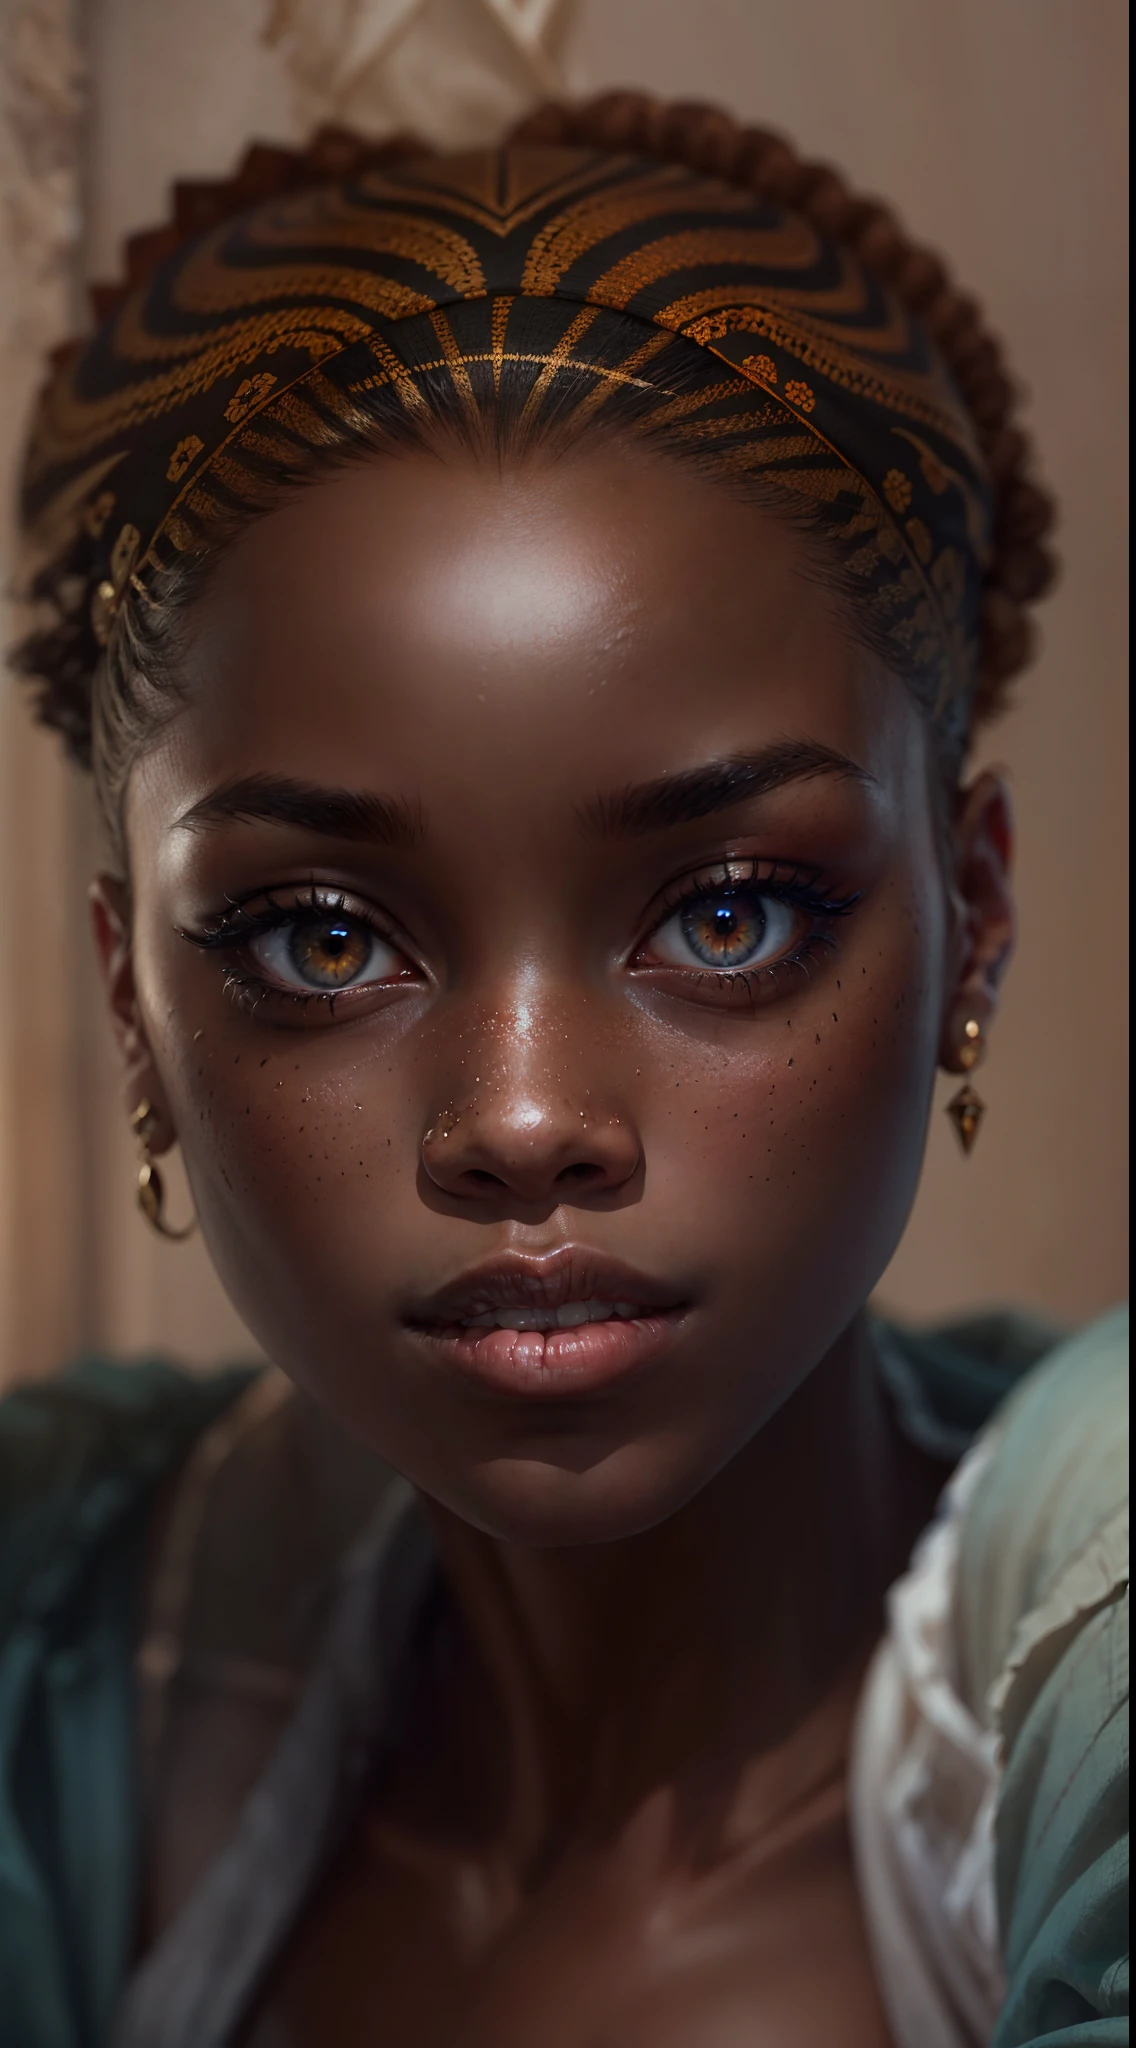 An exquisite portrait of a Black African woman with deep ebony skin, the photograph captured in stunning 8k resolution and raw format to preserve the highest quality of details. The woman's beauty is undeniable, her face commanding the frame in a close-up shot that reveals the intricate details of her eyes. She wears a dress that complements her radiant skin, and her eyes are portrayed with meticulous attention to detail, showcasing the captivating depth within. The photograph is taken with a lens that emphasizes the defiance in her gaze, and the backdrop is a dark studio setting that enhances the muted colors of the scene. The lighting and shadows are expertly crafted to bring out the richness of her skin tone and the subtle nuances of her features. Her ginger hair, with its distinct hue, adds a touch of warmth and contrast against her ebony skin. The interior setting adds a sense of intimacy, while the freckles on her skin tell their own story. The overall composition captures her essence with authenticity and grace, creating a portrait that is a celebration of her heritage and beauty. Photography by defiance512, utilizing the best techniques for shadow and lighting, to create a mesmerizing portrayal that transcends the visual.